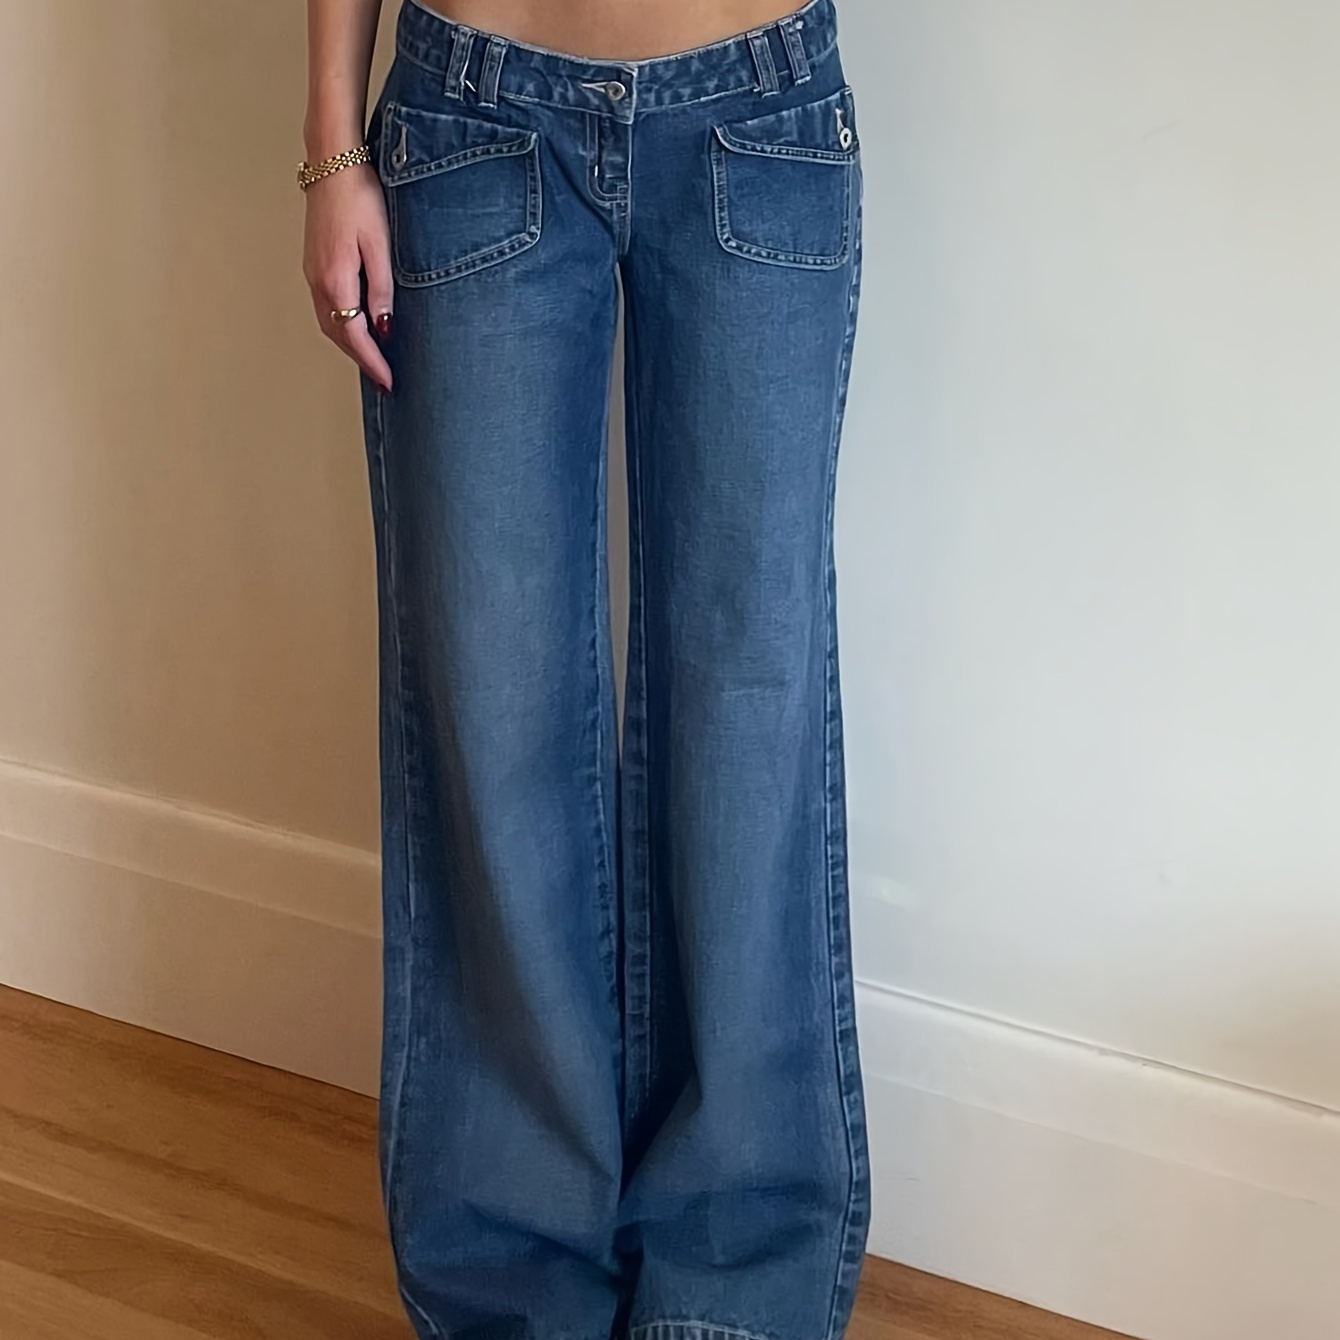 

Women's Vintage Style Wide Leg Denim Jeans, Plain Blue, With Button Detail, Casual Flared Trousers For Fashionable Retro Look Suit For Autumn